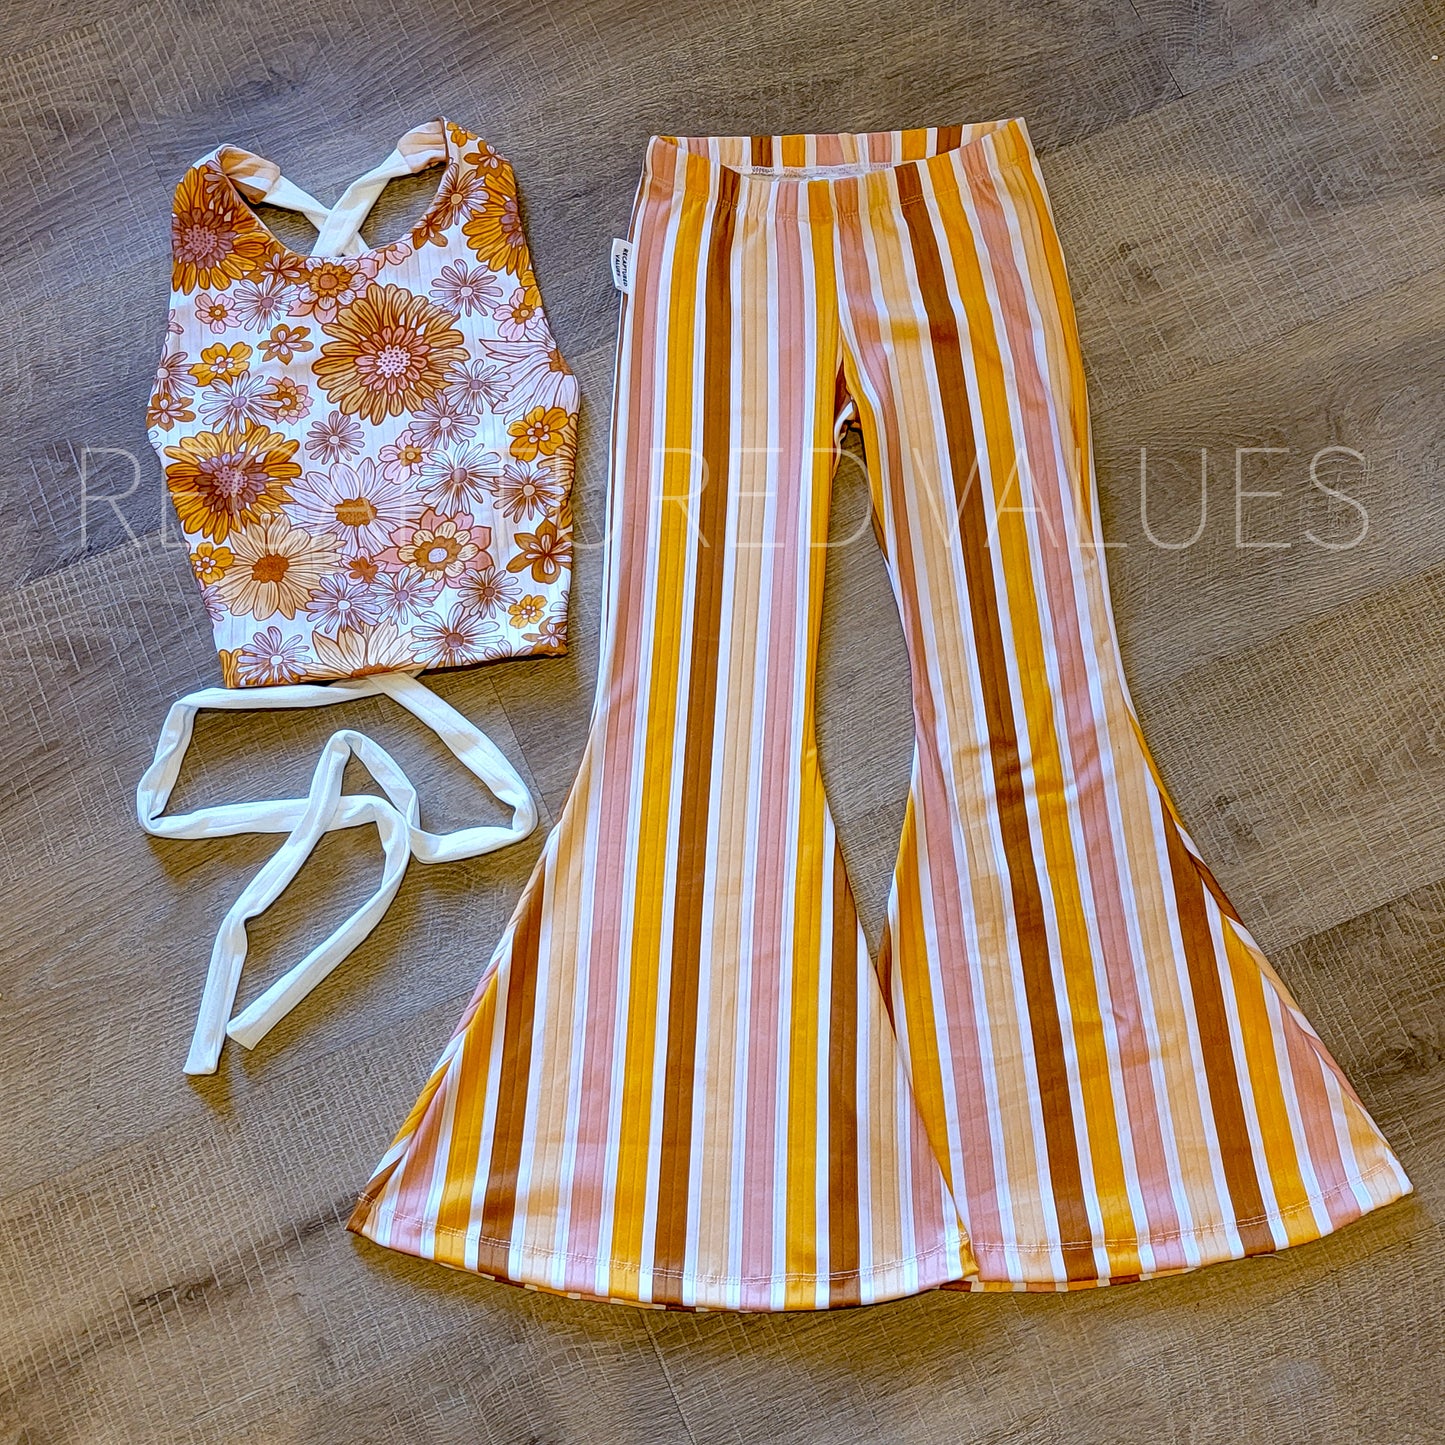 Groovy Retro Hippie Floral Halter Crop Top with Stripe Flared Bell Bottoms for Baby & Toddler Girls, Peach, Sunset, Rust Brown, Butterscotch